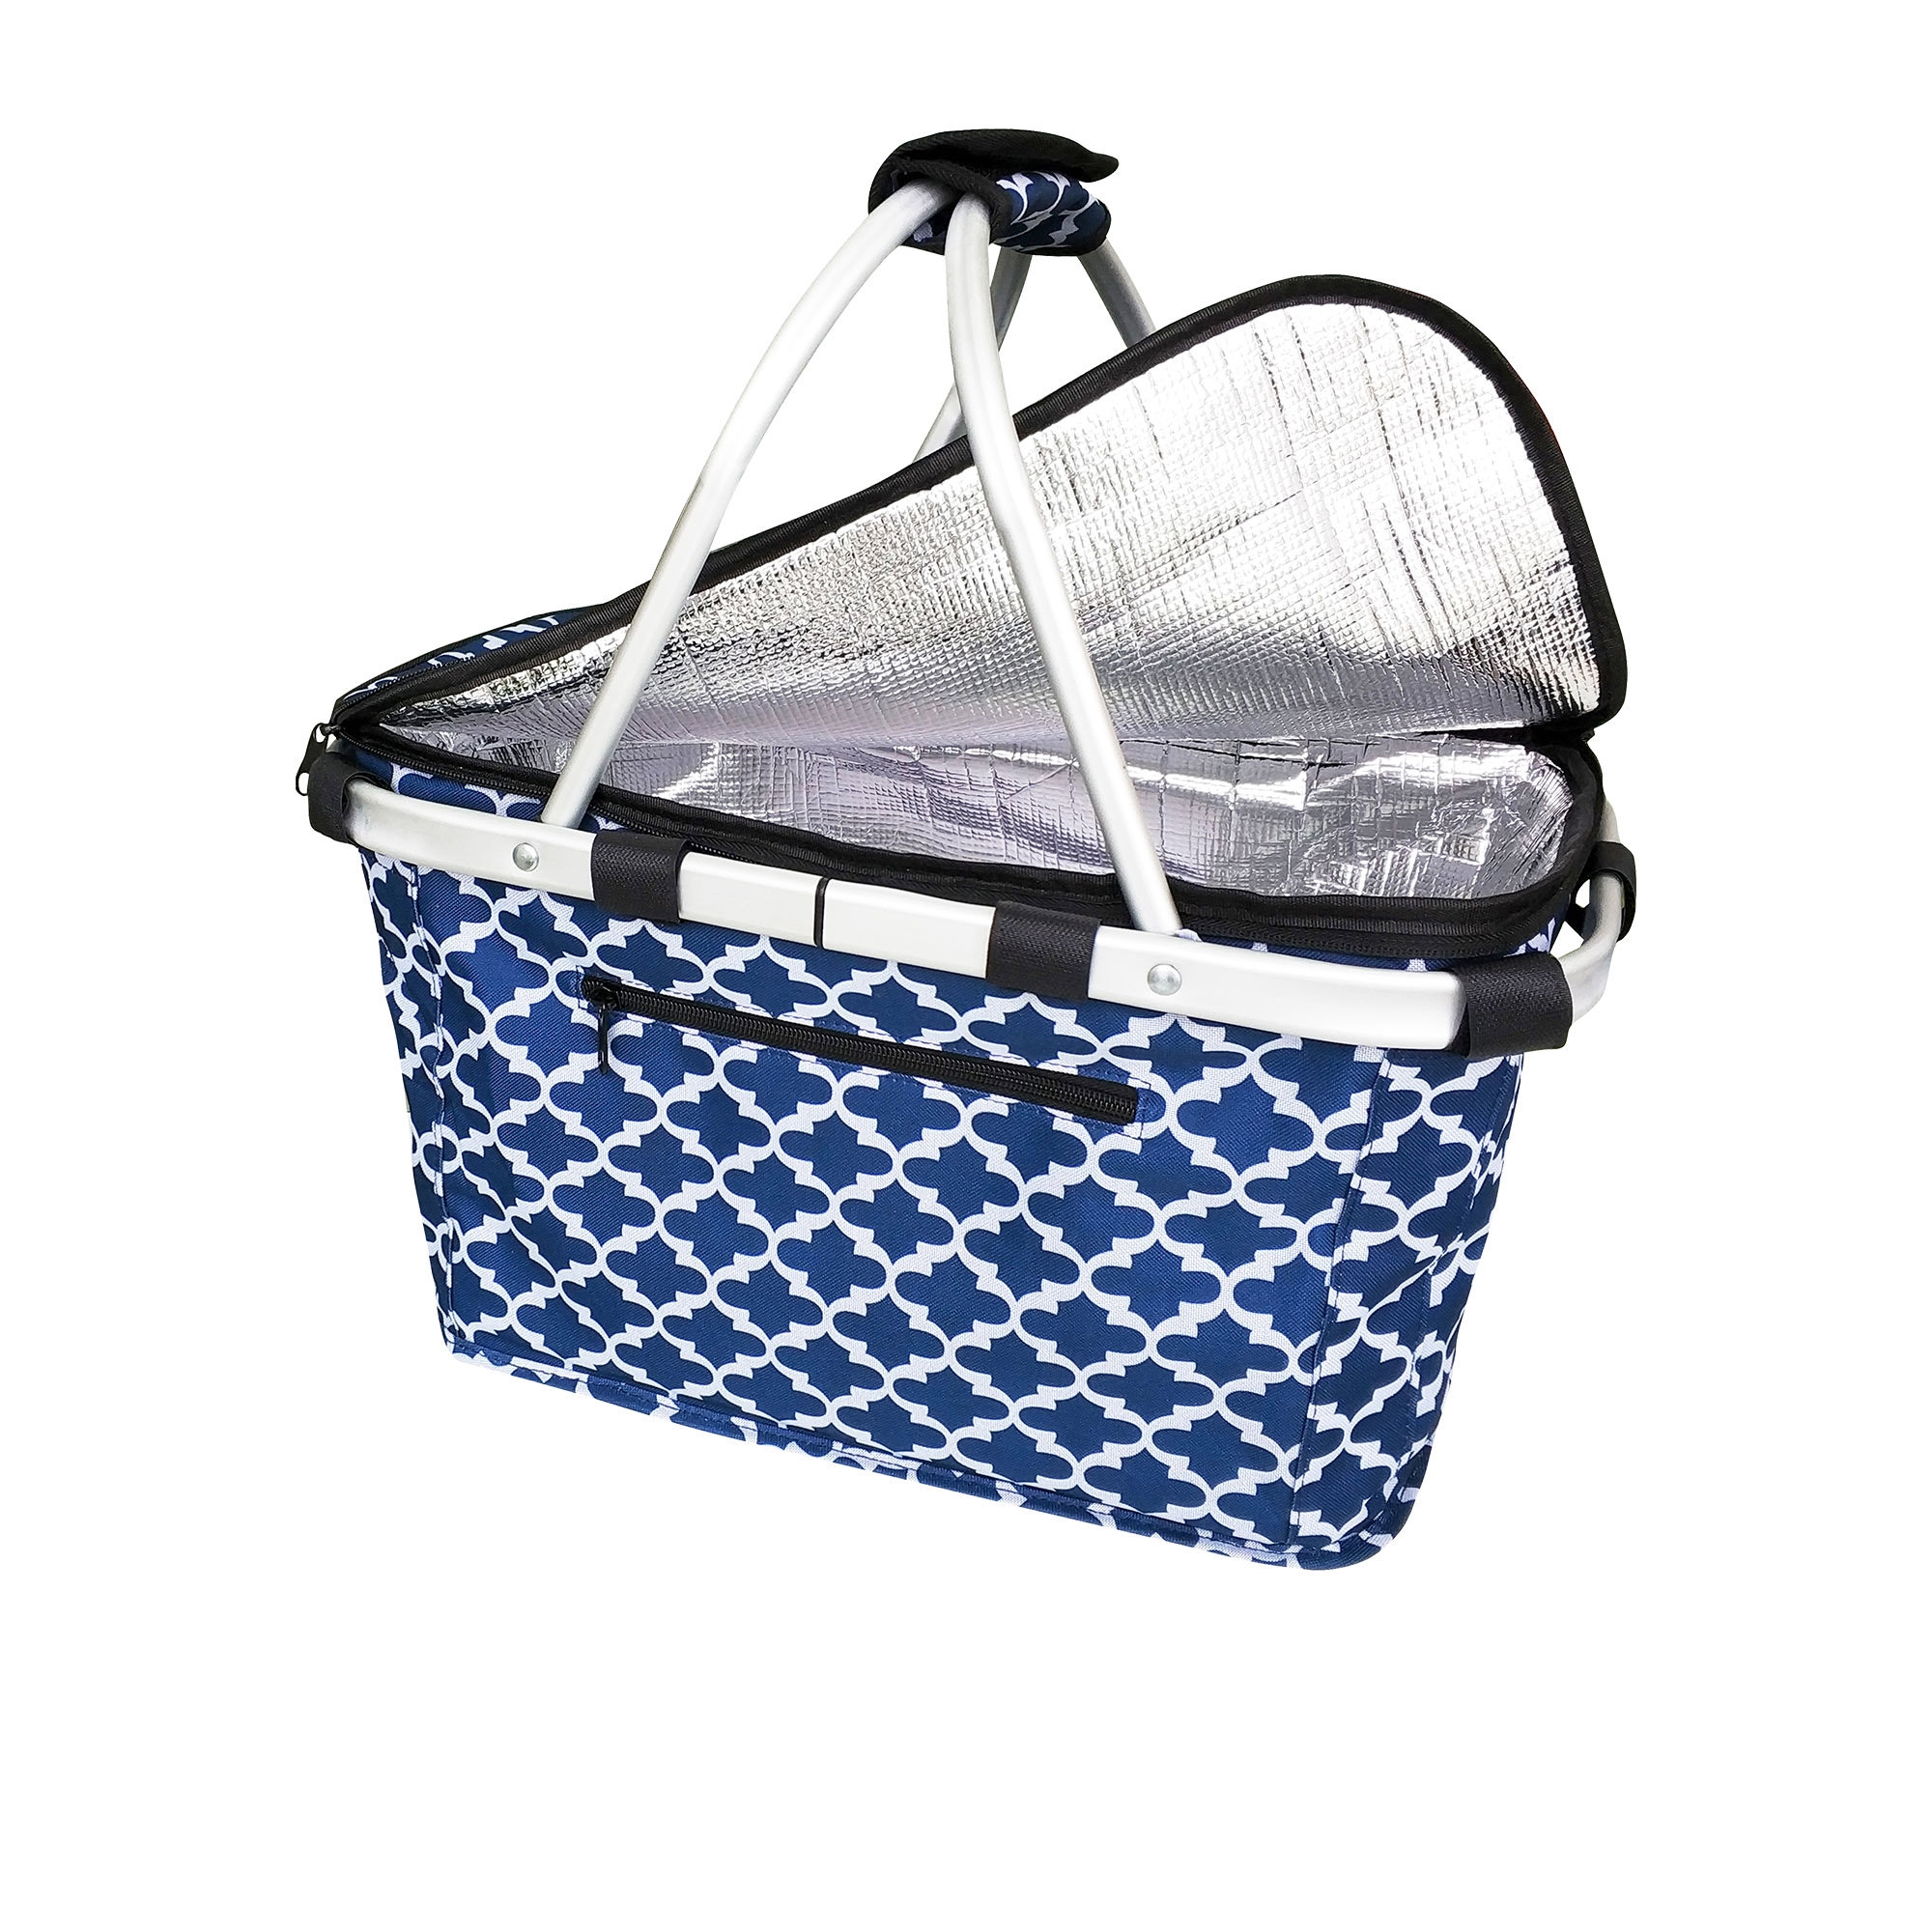 Sachi Insulated Carry Basket with Lid Moroccan Navy Image 1